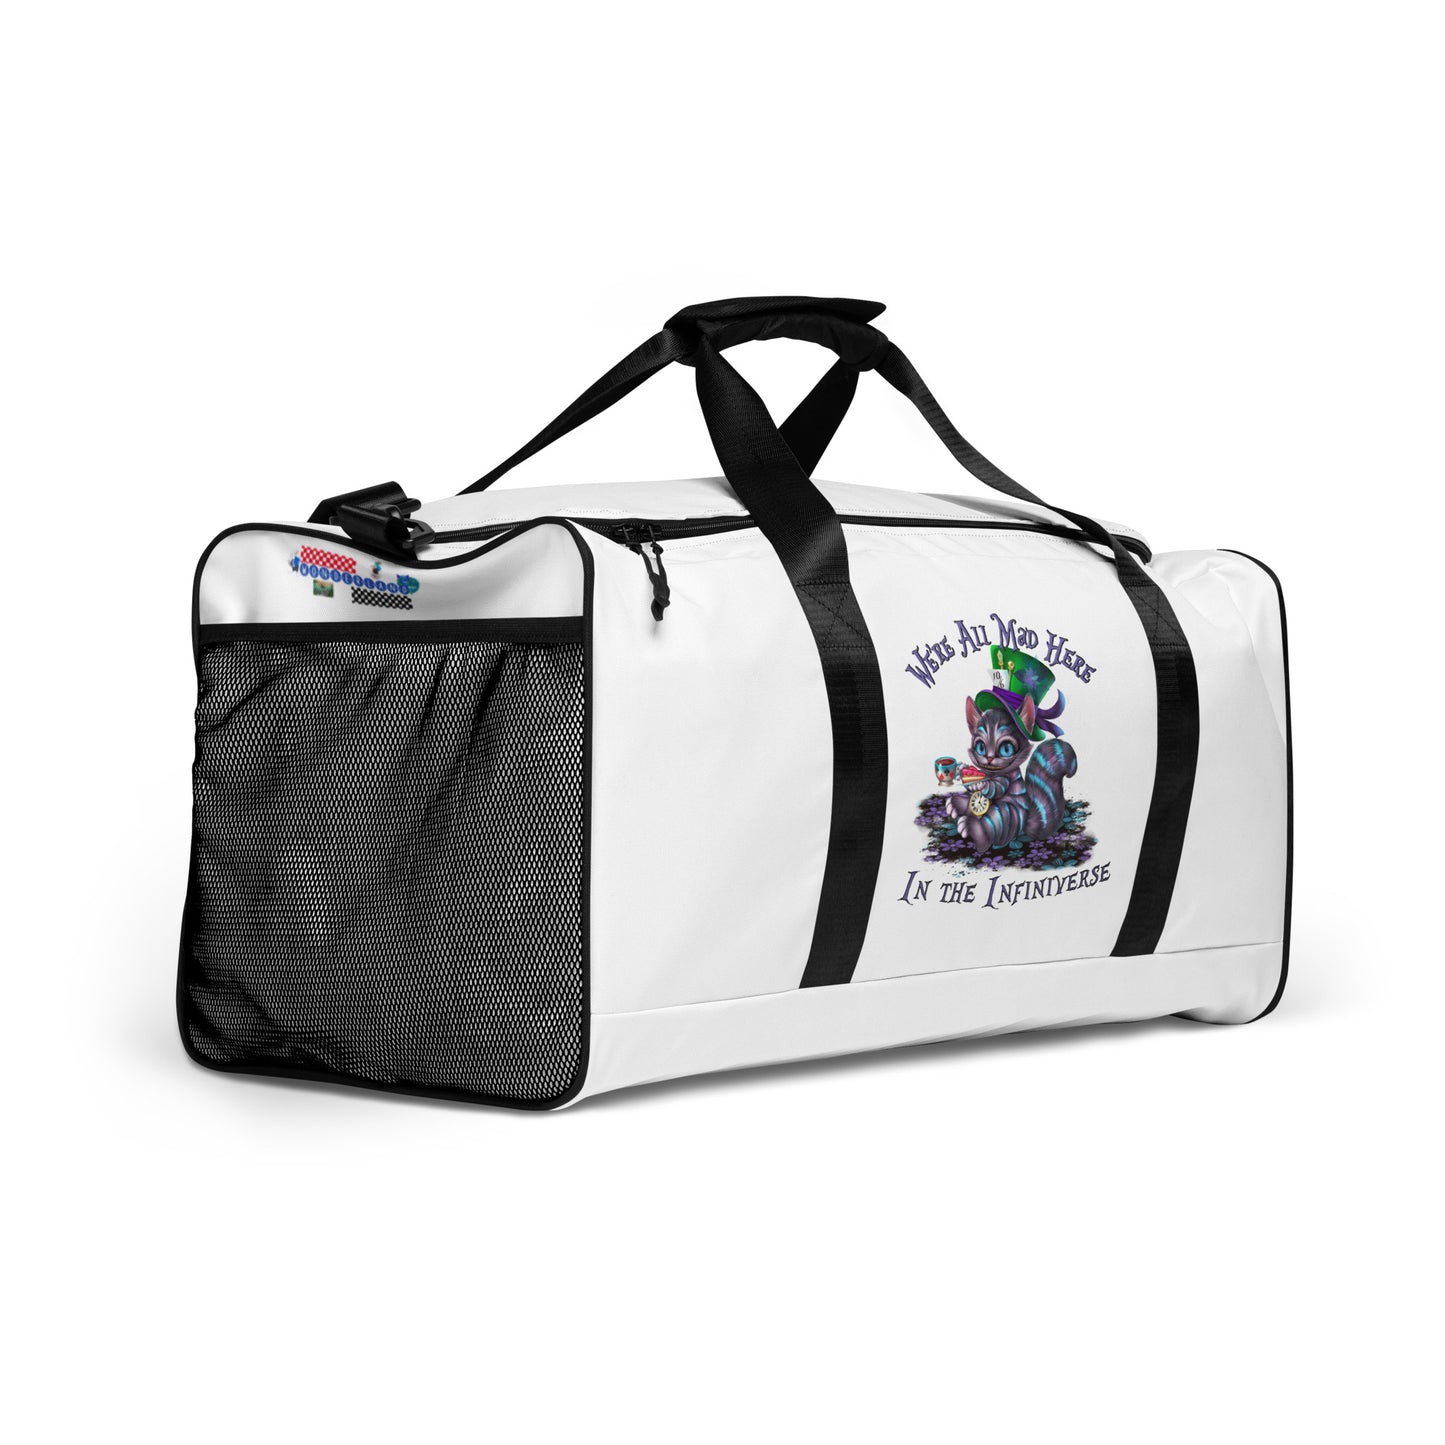 We're all Mad Here in the Infiniverse Wonderland Duffle bag - Perfect Way to Carry Your Oculus